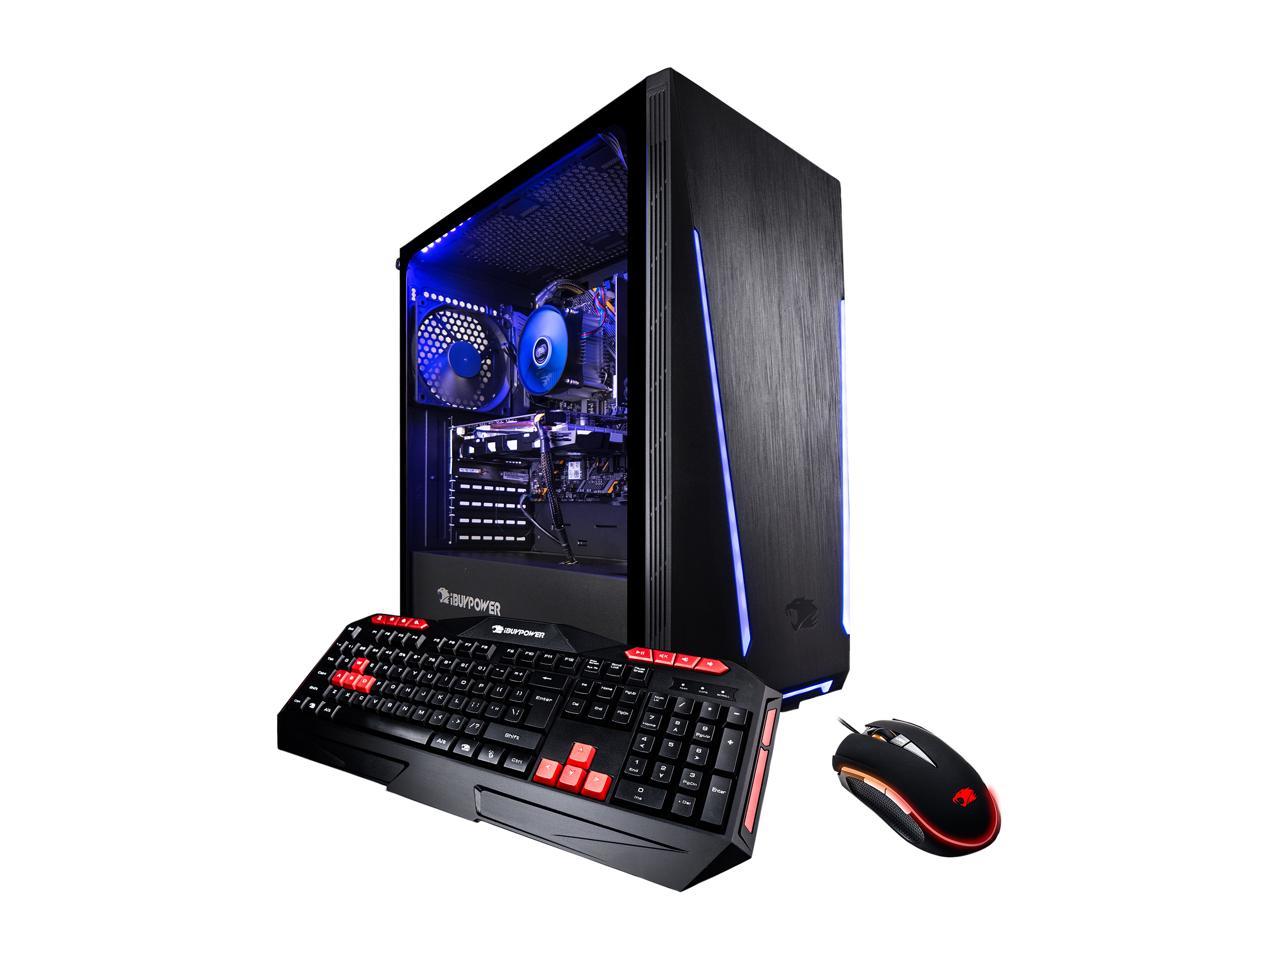 Costume Best Monitor For Ibuypower Gaming Pc for Small Bedroom